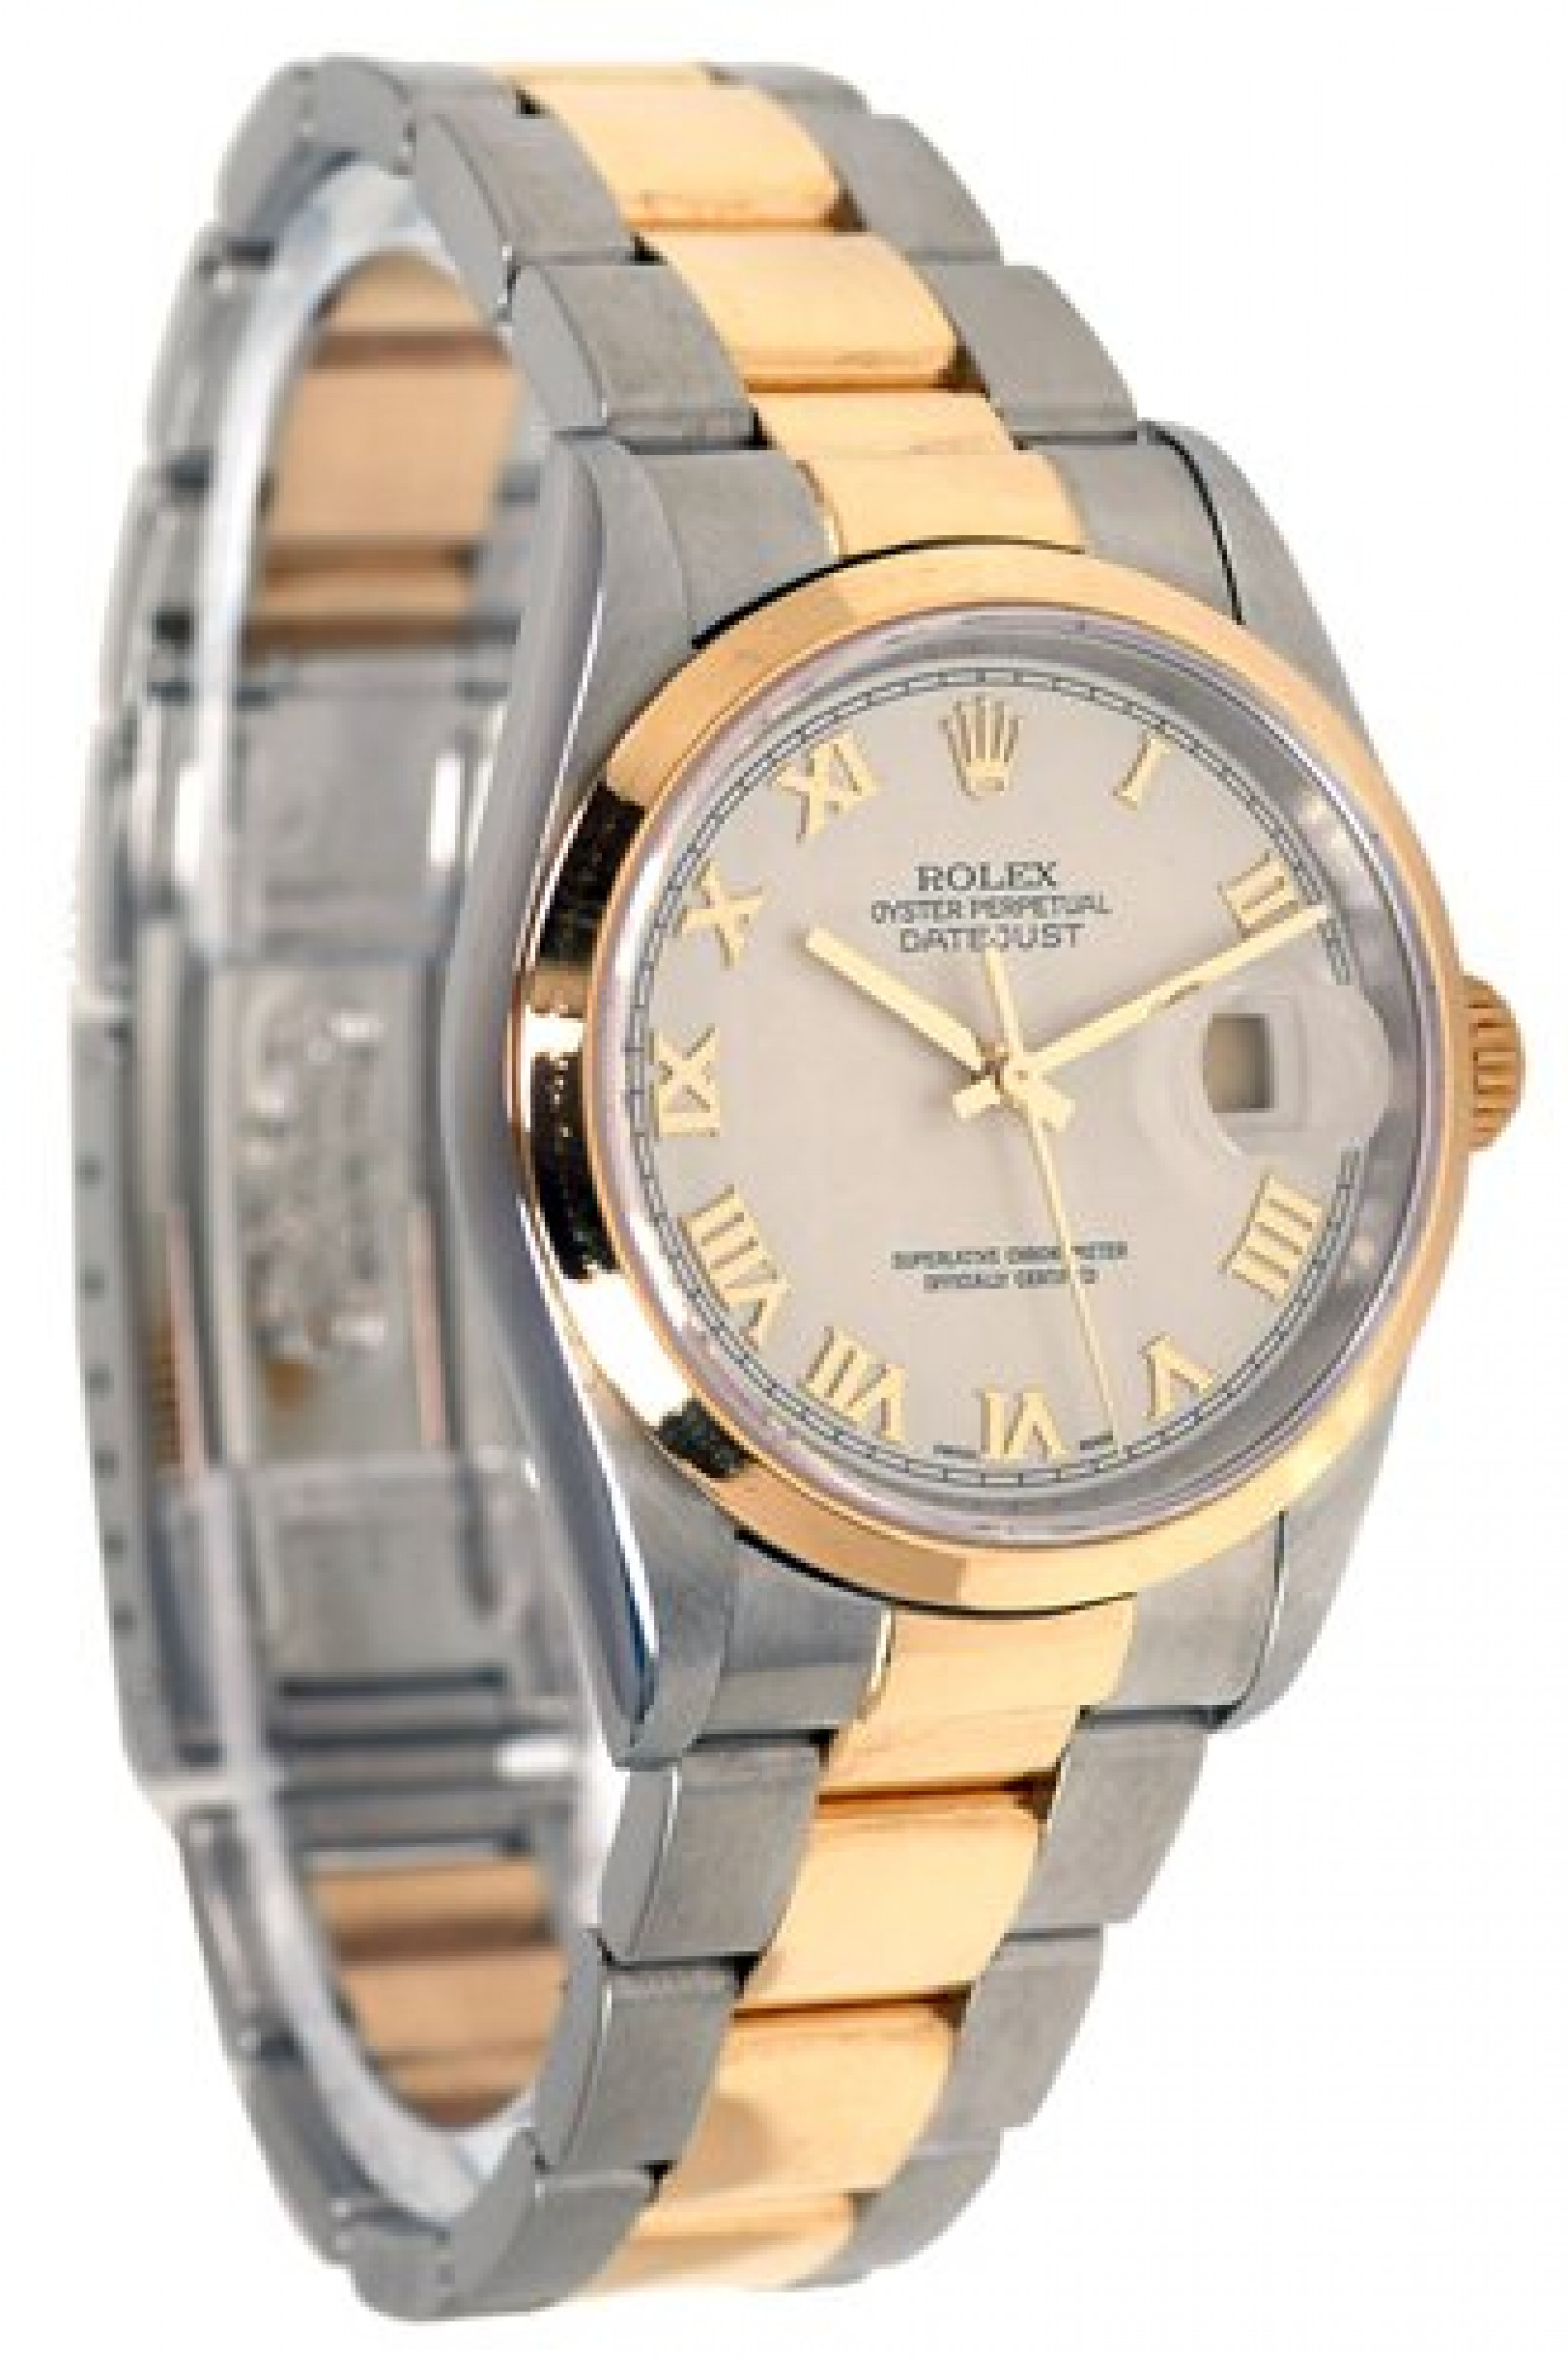 Rolex Datejust 16203 Gold & Steel with Ivory